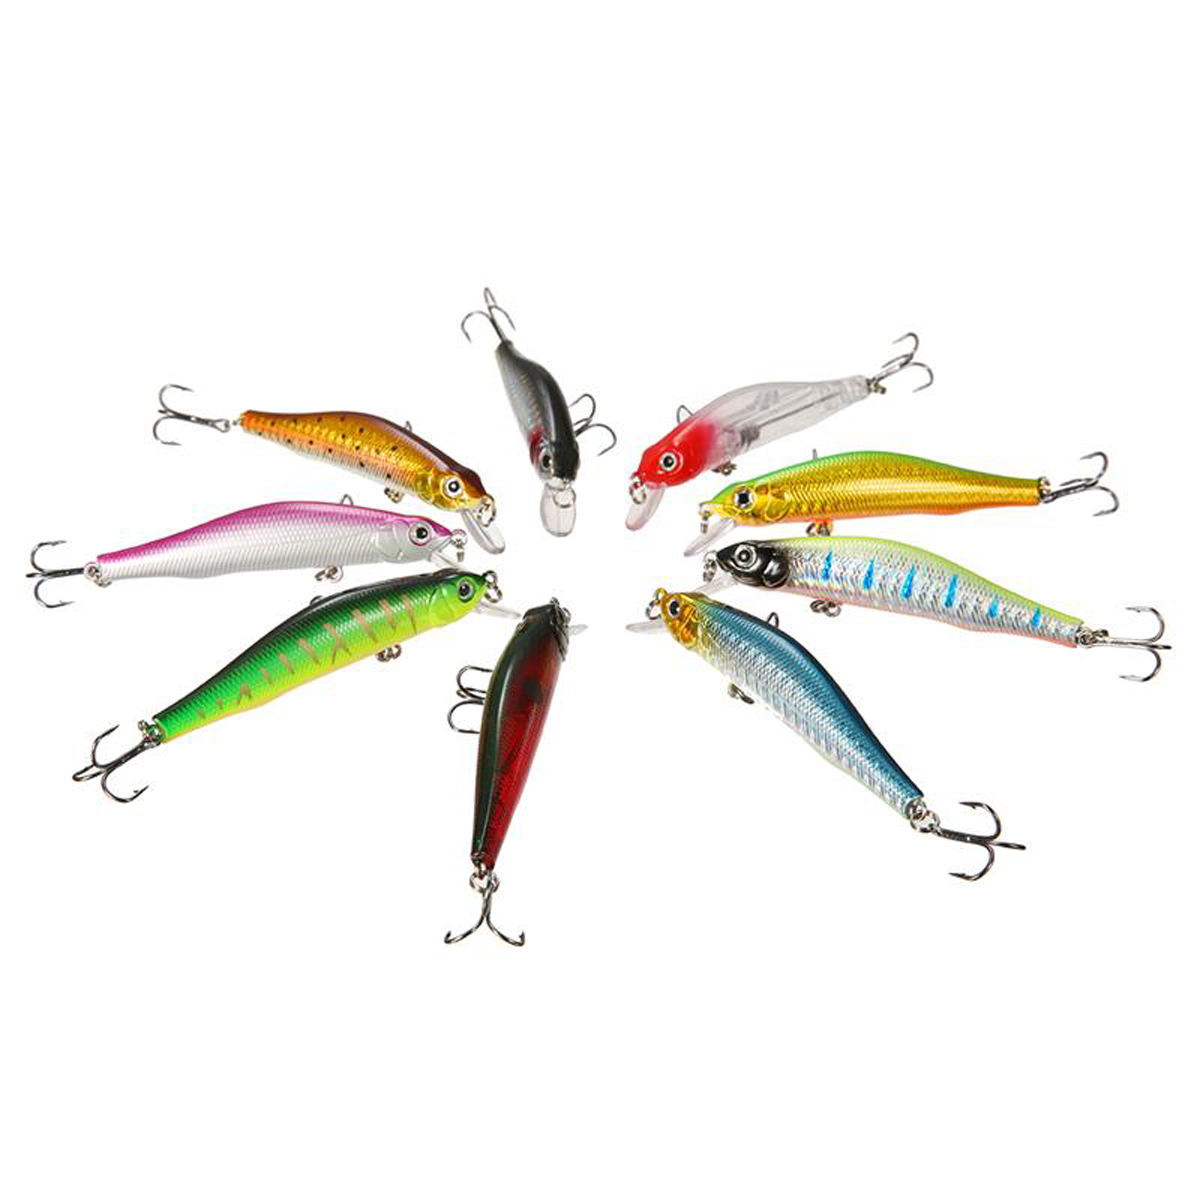 ZANLURE-1pc-80mm315quot-85g-Magnet-Minnow-Fishing-Lure-Artificial-Hard-Bait-Hook-3D-Eyes-Sea-Fishing-1314538-3